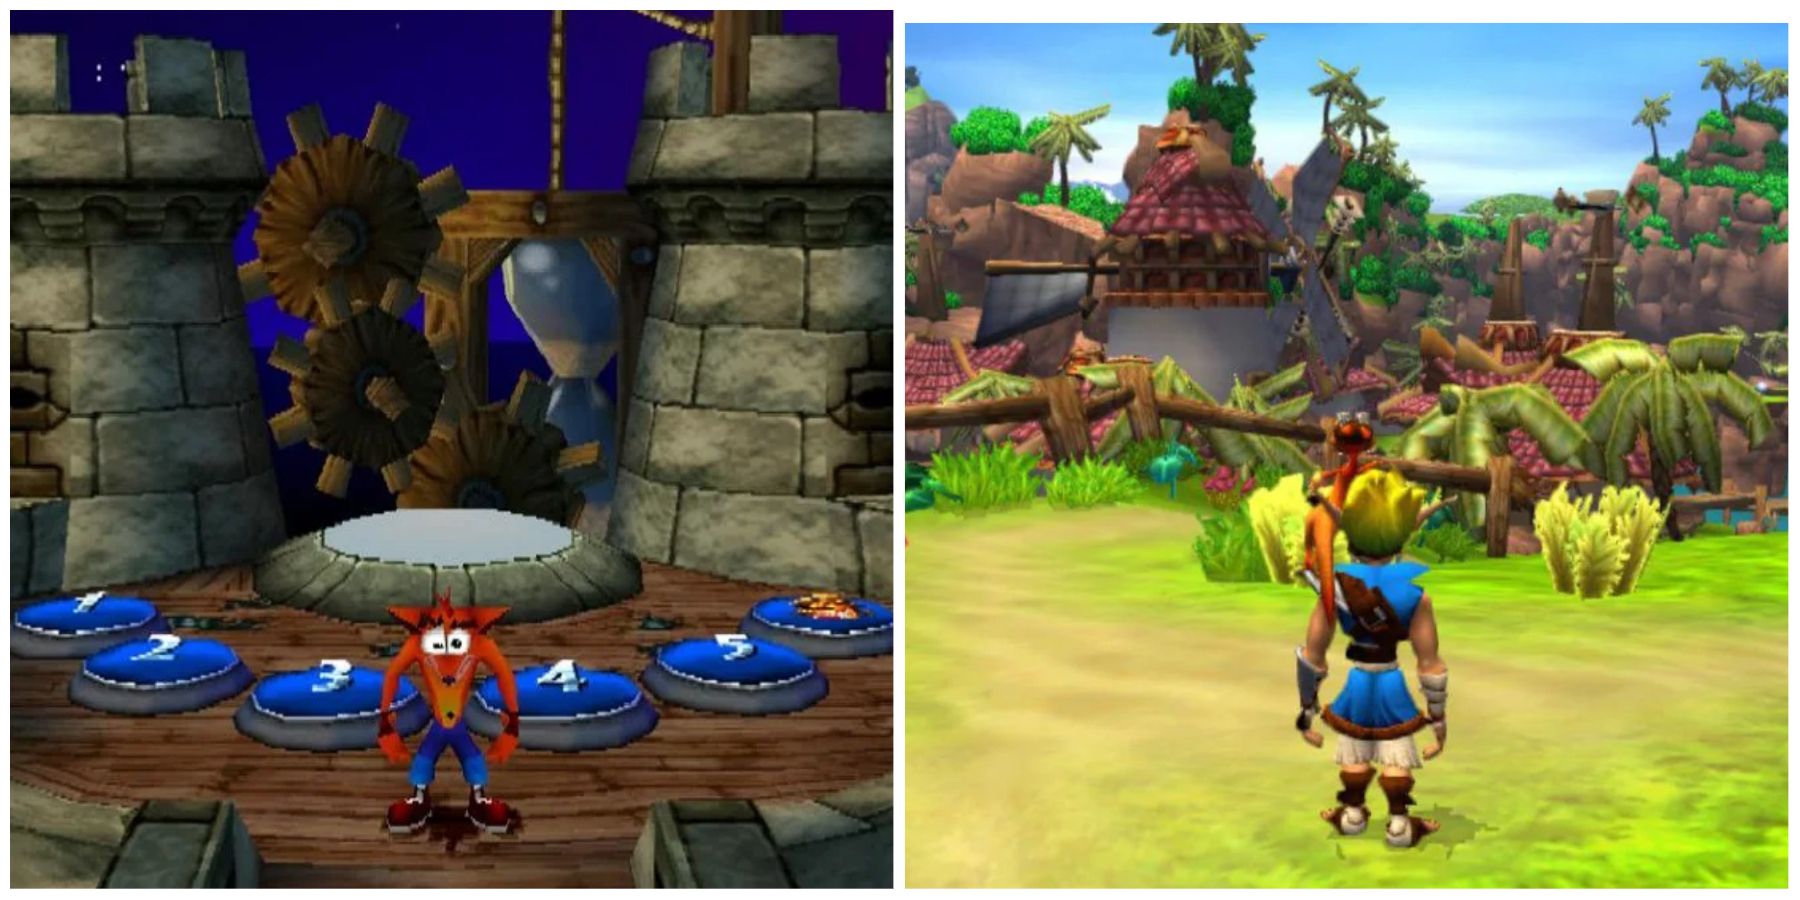 (Left) Crash Bandicoot in warp room (Right) Jak in first section of first game